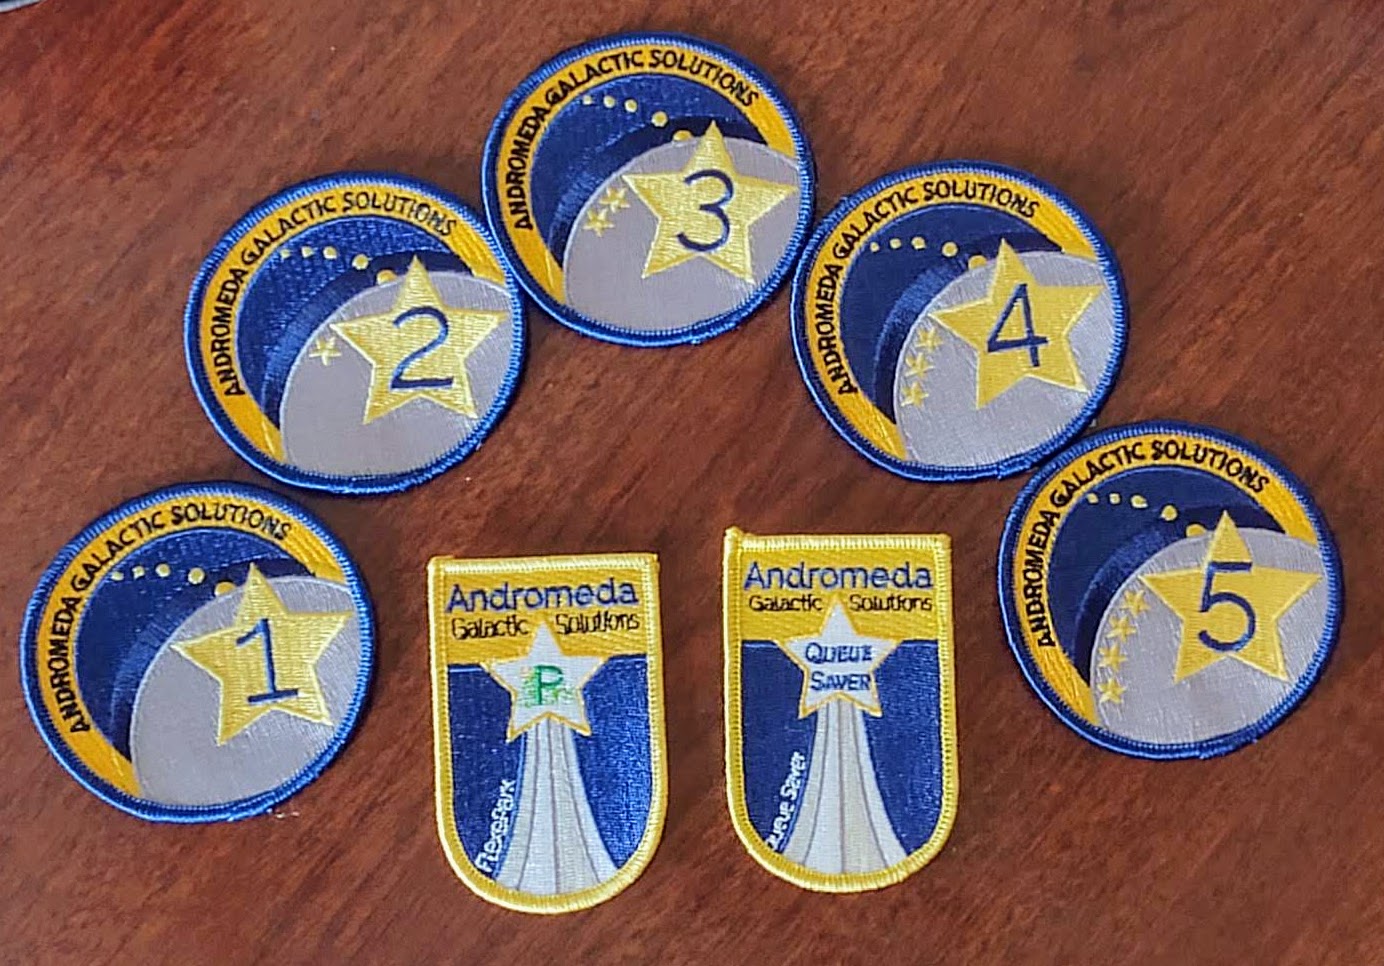 Mission Patches for Andromeda Galactic Solutions. Annual patches are round and show from 1 to 5 stars to represent the number of years with the company. There's one large star with the number in it, then smaller star trailing behind it. There are also two patches shaped like a shield. Each has a shooting star with a product logo in the middle, and the stars tail makes it look like it's shooting up from beneath as a form of "launch" effect.